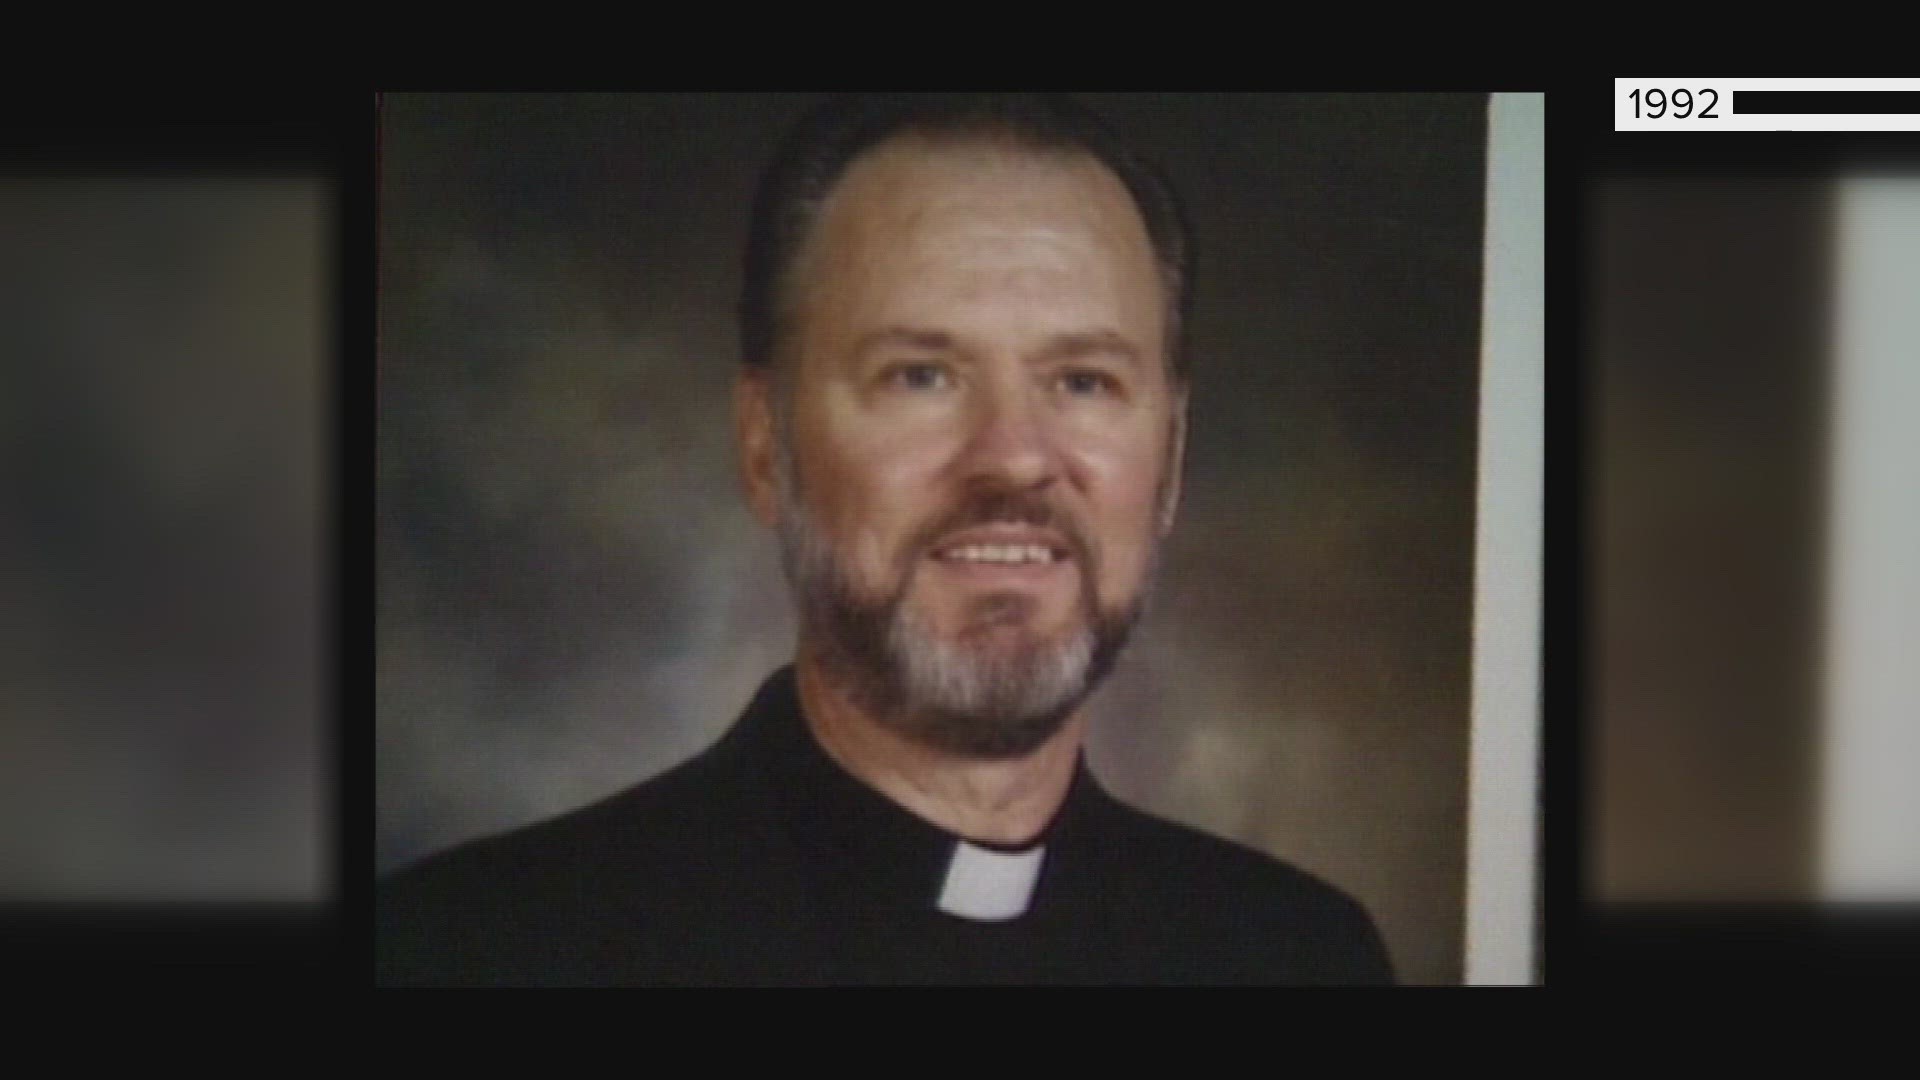 Secret church records obtained by the Guardian and WWL show Archbishop Aymond wished to keep supporting Gerard Howell, a priest accused of molesting 24 children.